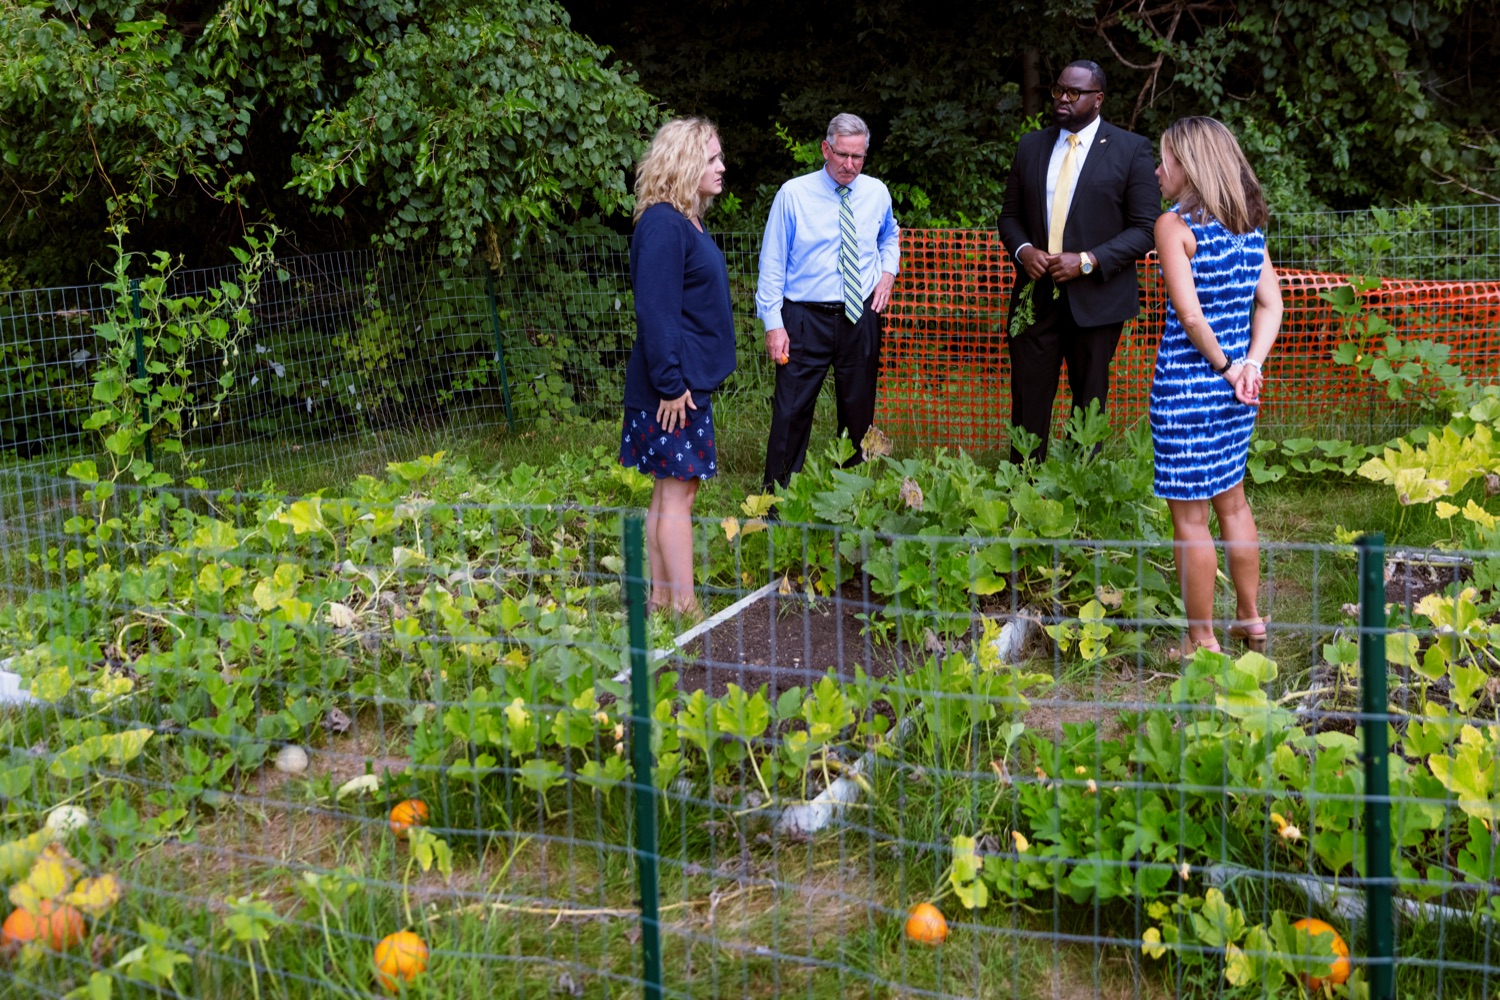 From left; Meredith Seidel, teacher at Hill Top Academy; PA Dept. of Agriculture Secretary Russell Redding; Stephon Fitzpatrick, executive director of Pennsylvania commission for Agriculture Education Excellence, and Vonda Ramp, PA Dept. of Education director of Childhood Nutrition Programs, take a tour of a garden during a press conference, which highlighted the success of Pennsylvania's farm to school programs, at Hill Top Academy in Mechanicsburg on Friday, August 27, 2021.<br><a href="https://filesource.amperwave.net/commonwealthofpa/photo/19054_AGRIC_FarmToSchool_NK_003.jpg" target="_blank">⇣ Download Photo</a>